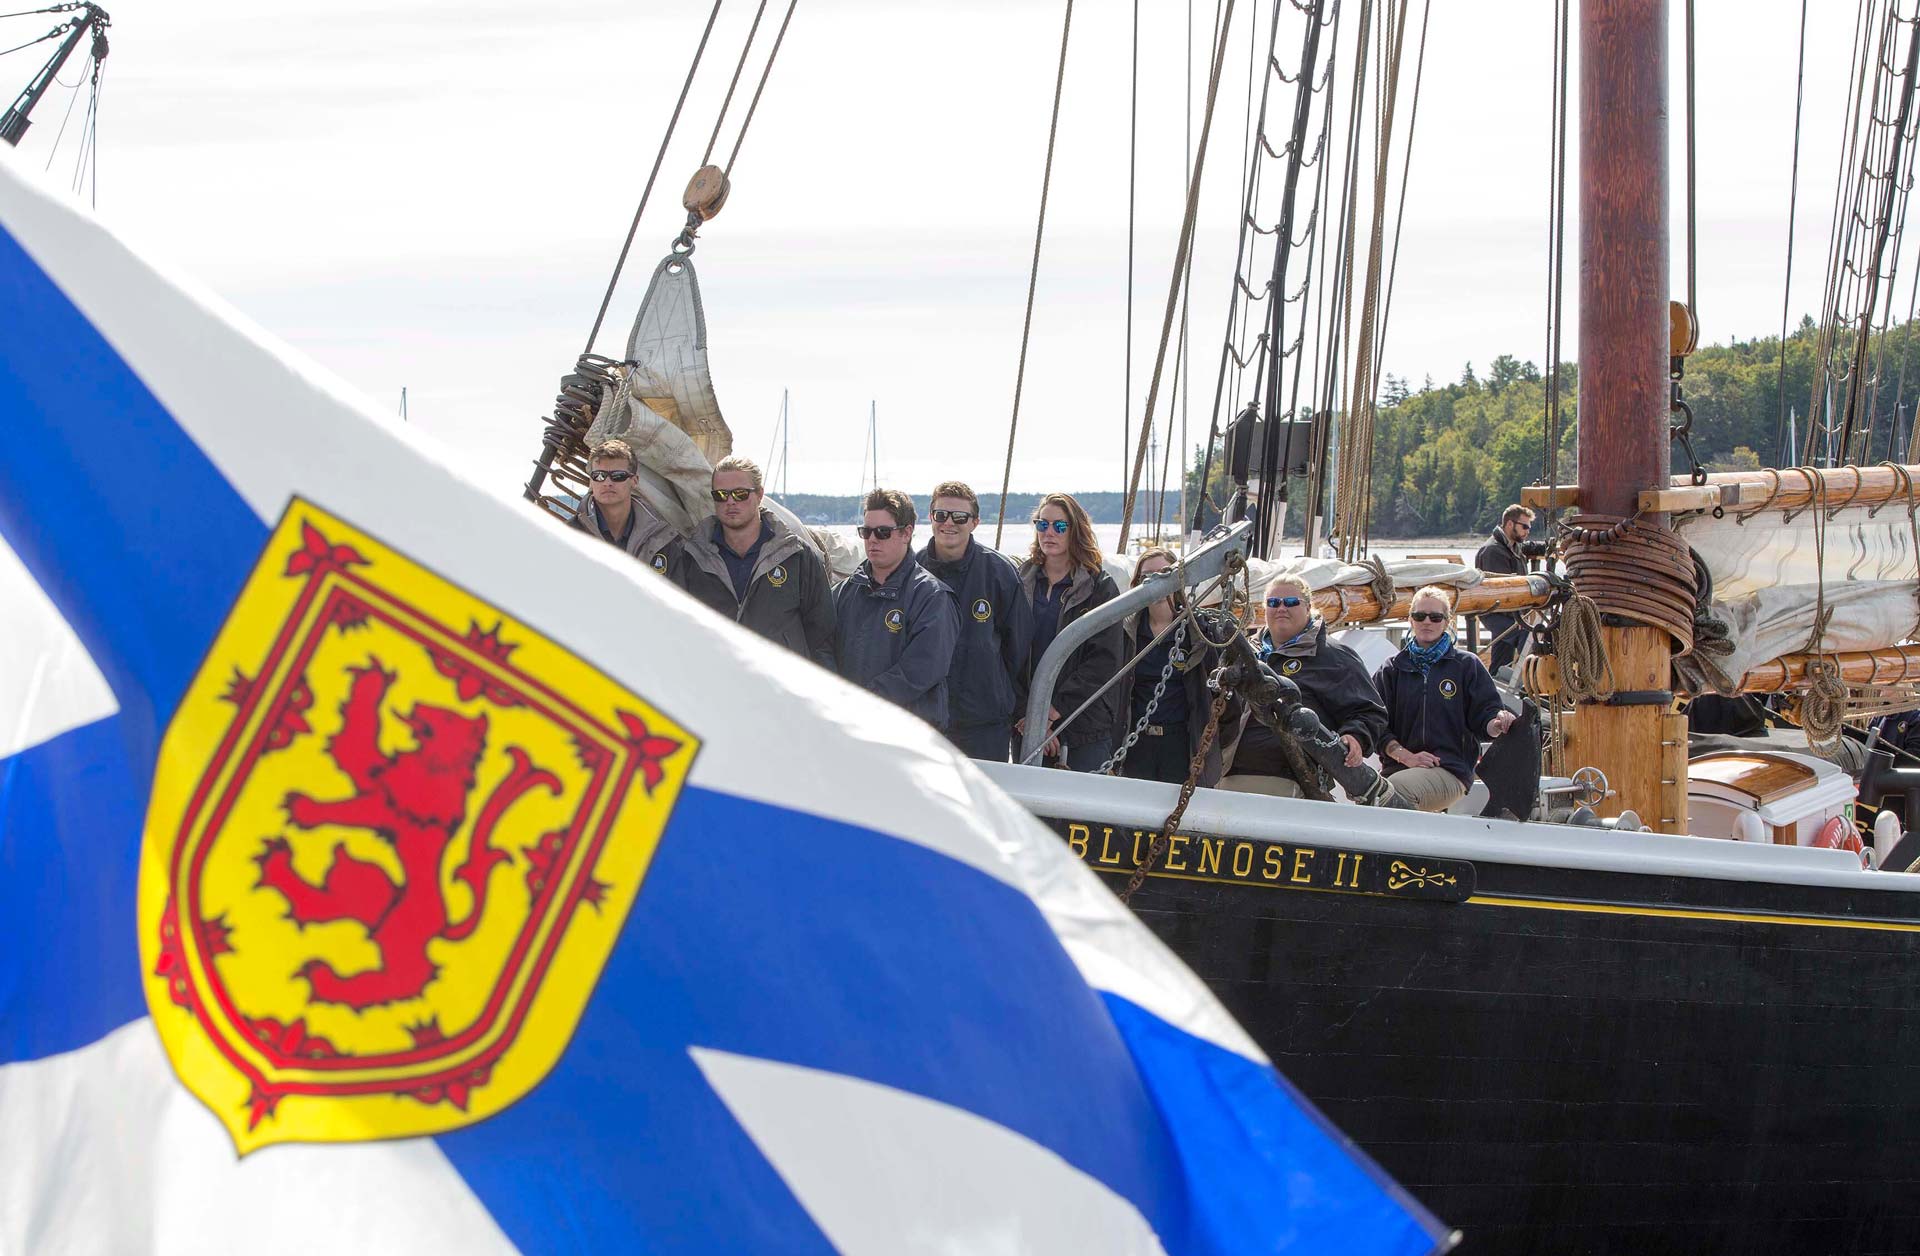 Nova Scotian Flag in front of Tall Ship